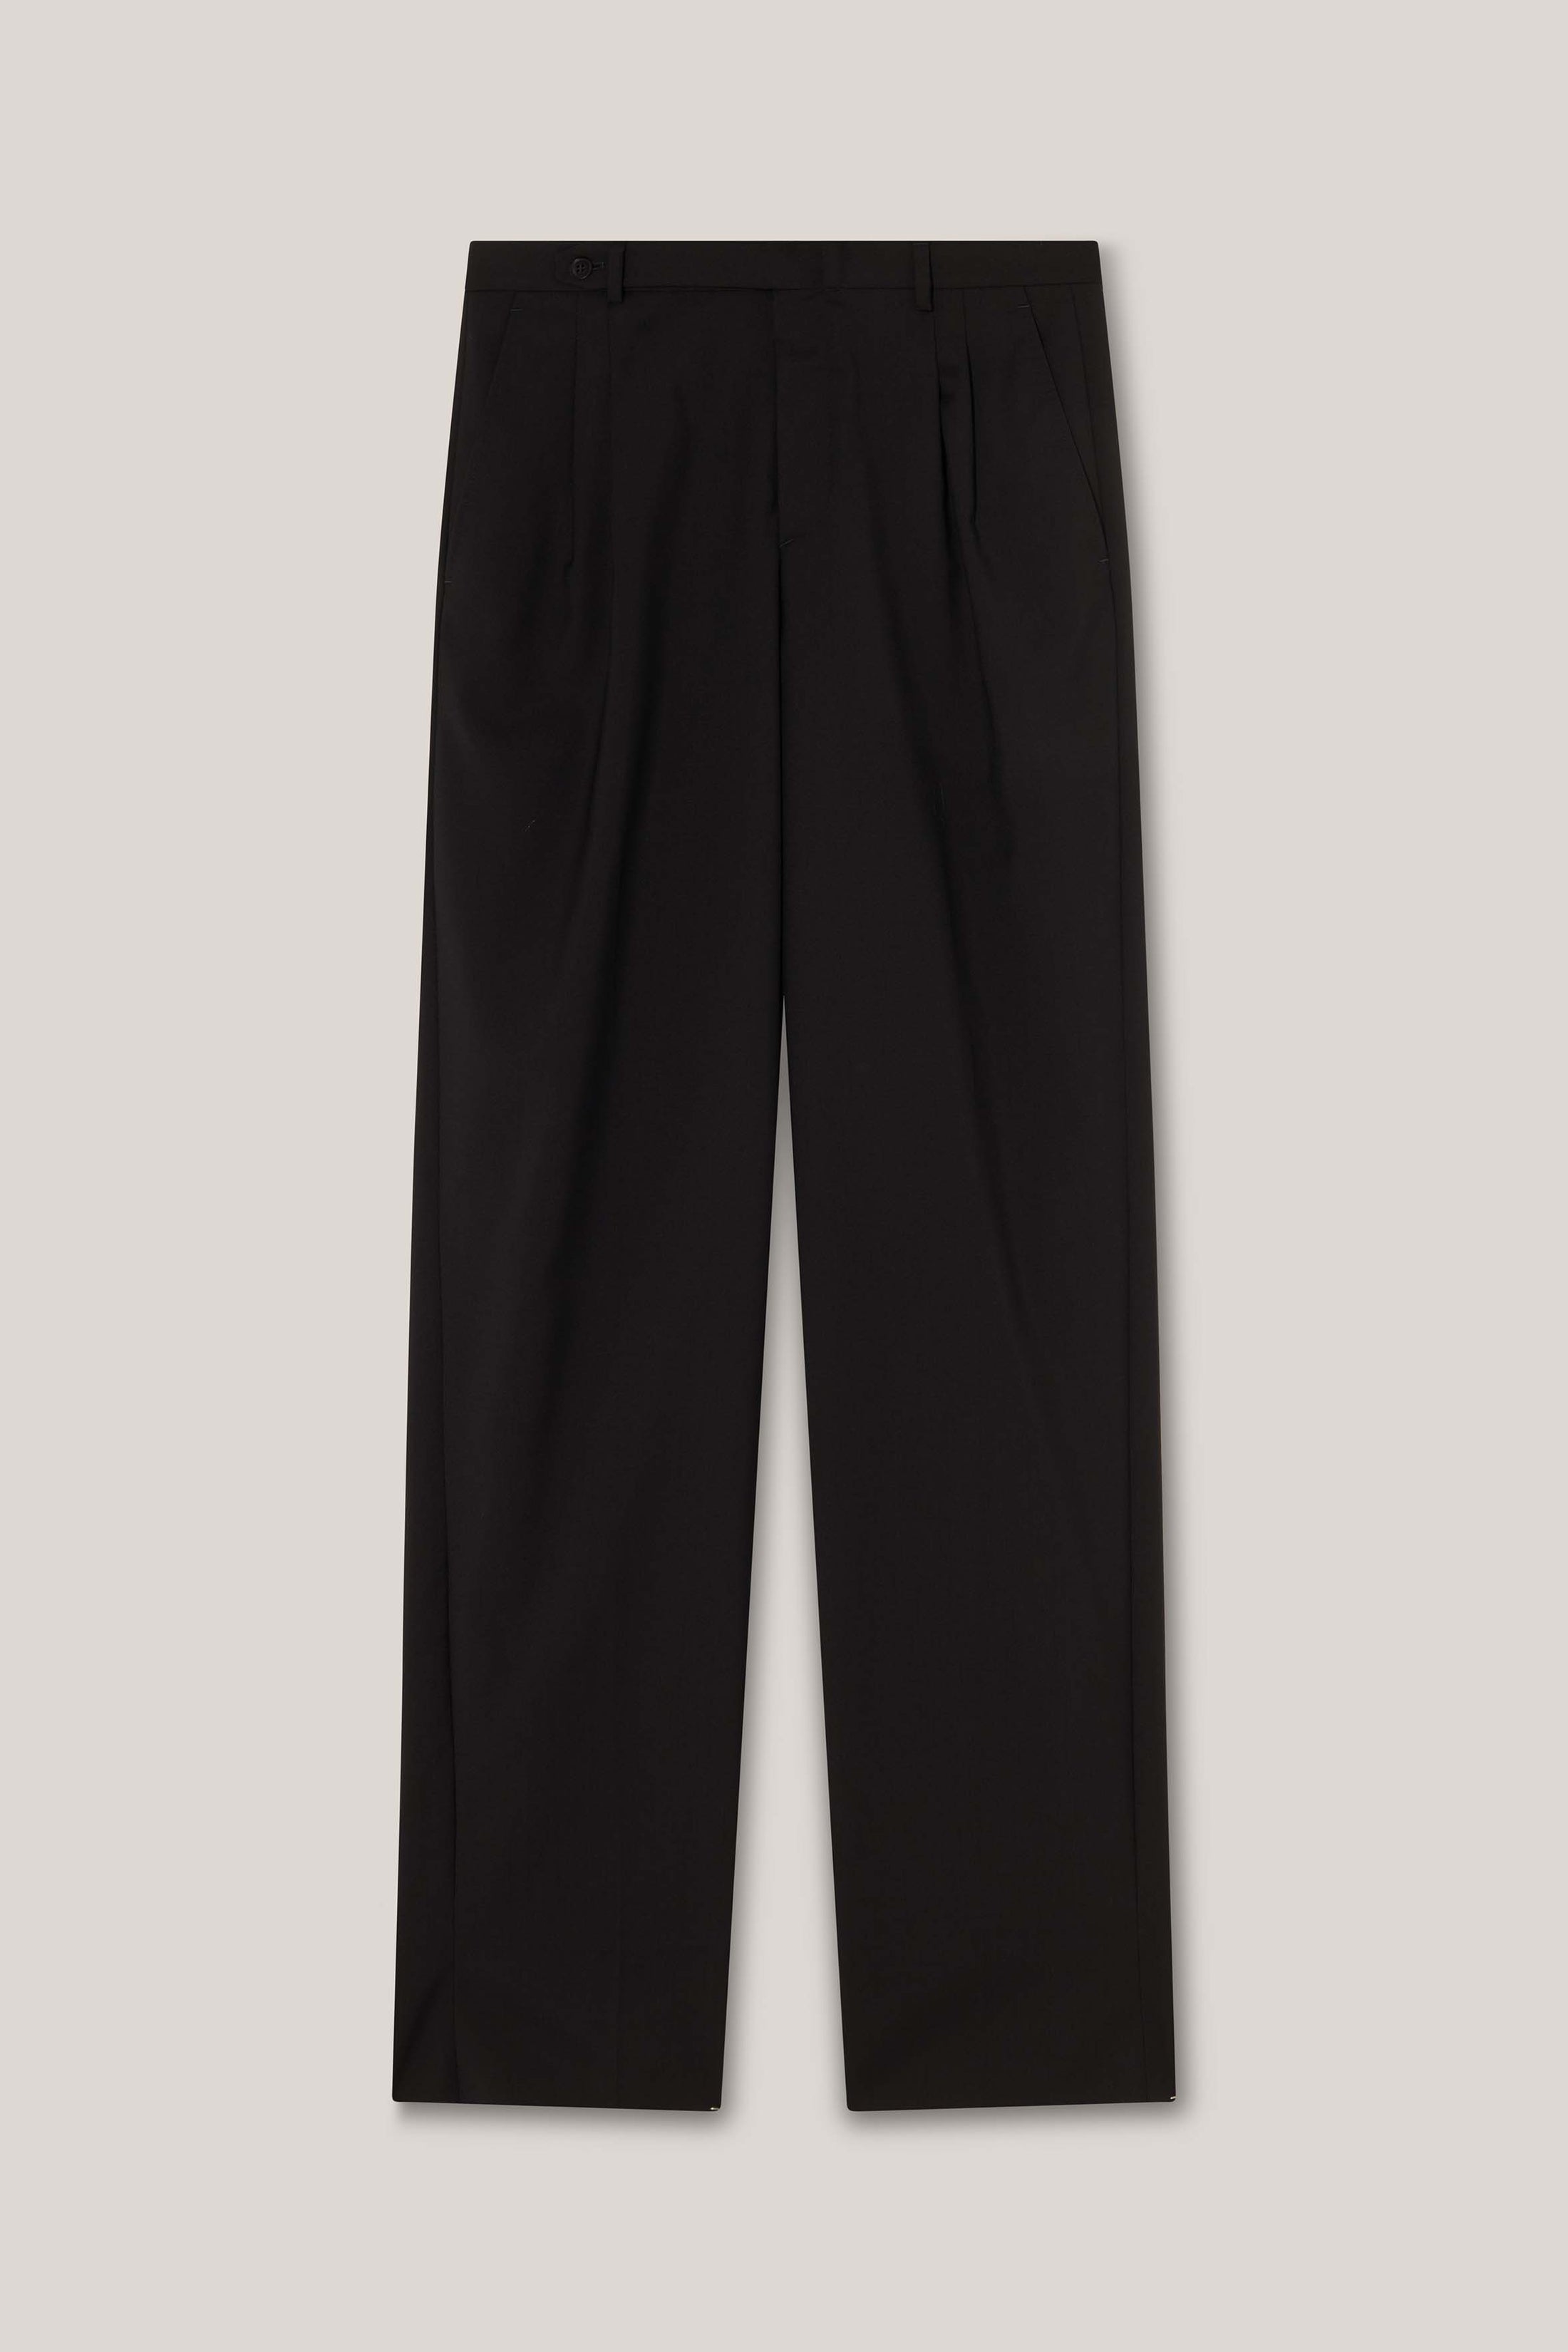 Capri Plated Tailored Trousers